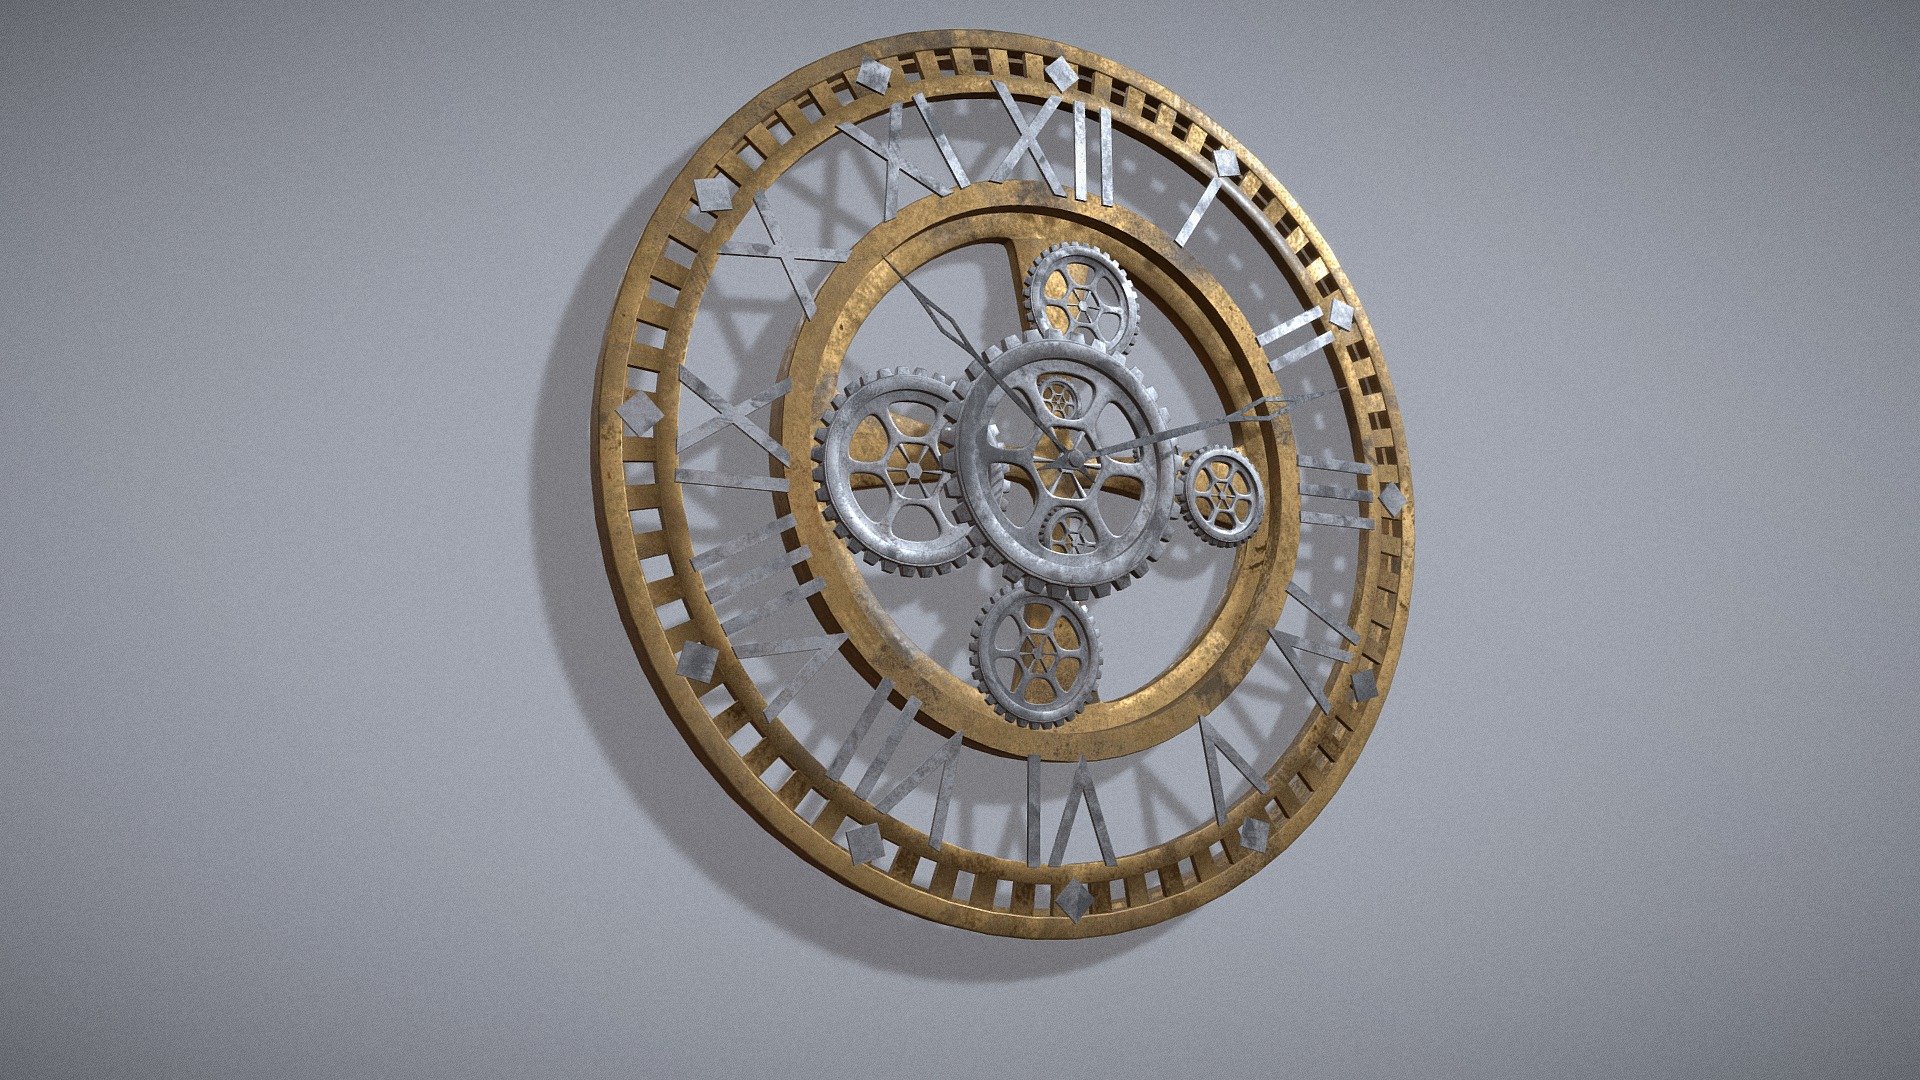 Steampunk style wall clock. 

Created with quad workflow as possible except the numbers and fully unwrapped non-overlapping 3d model